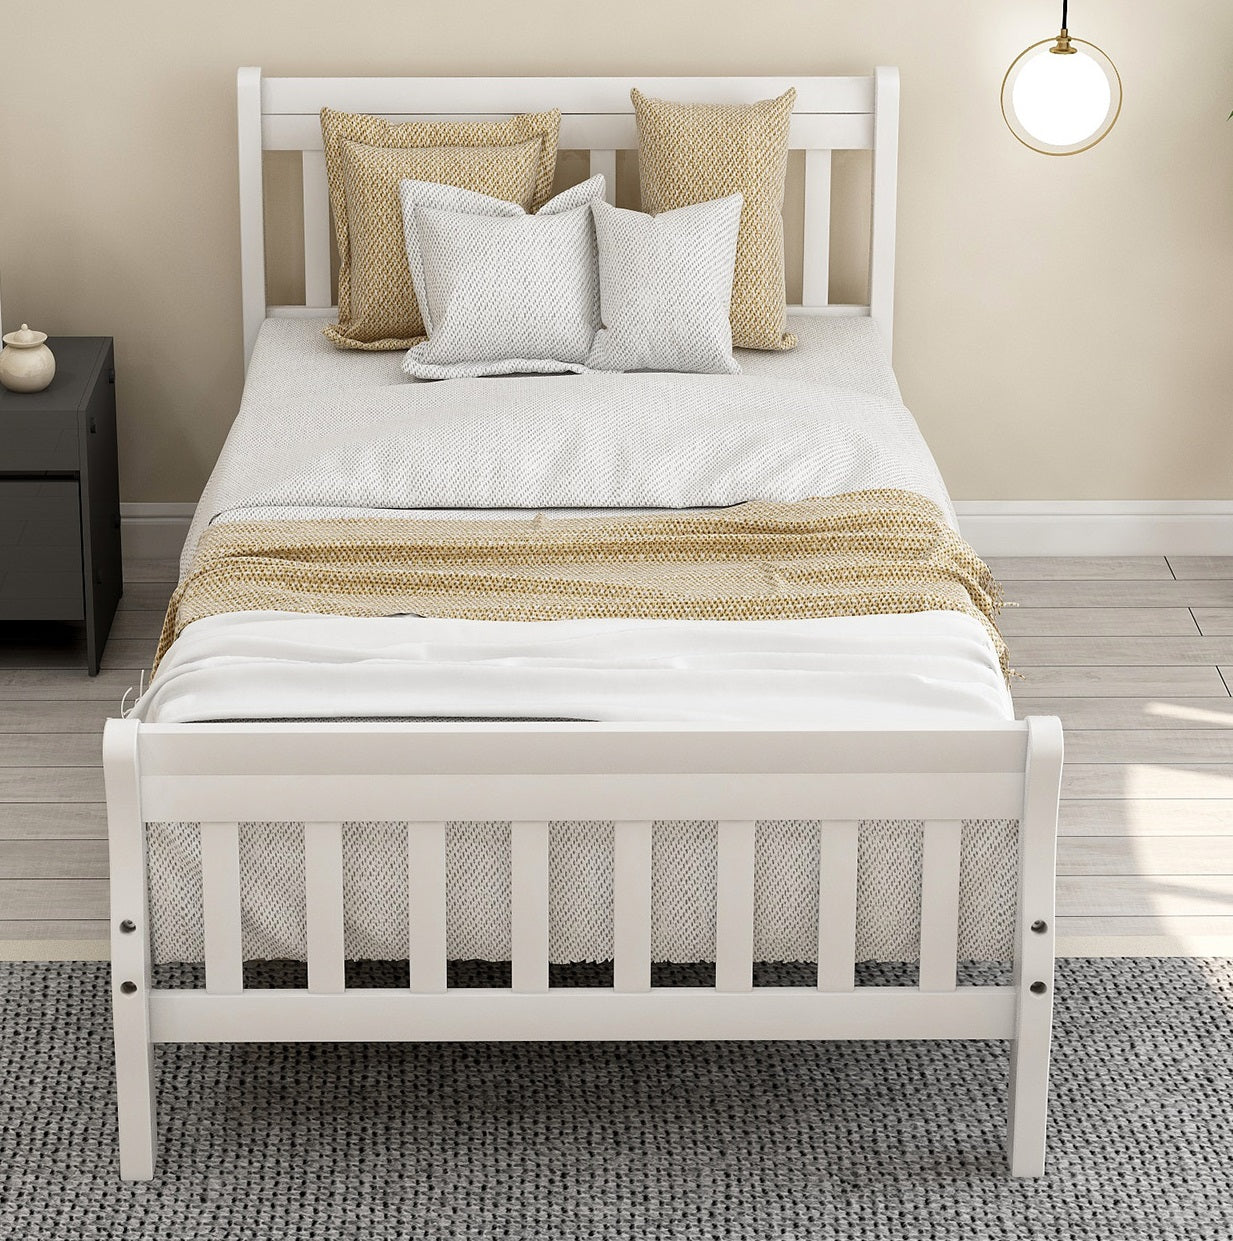 Twin Size Bed frame, Wooden Bed Frame with Headboard, Twin Bed Frame for Kids Adults, Twin Size Bed Frame for Bedroom, White, LJ2455